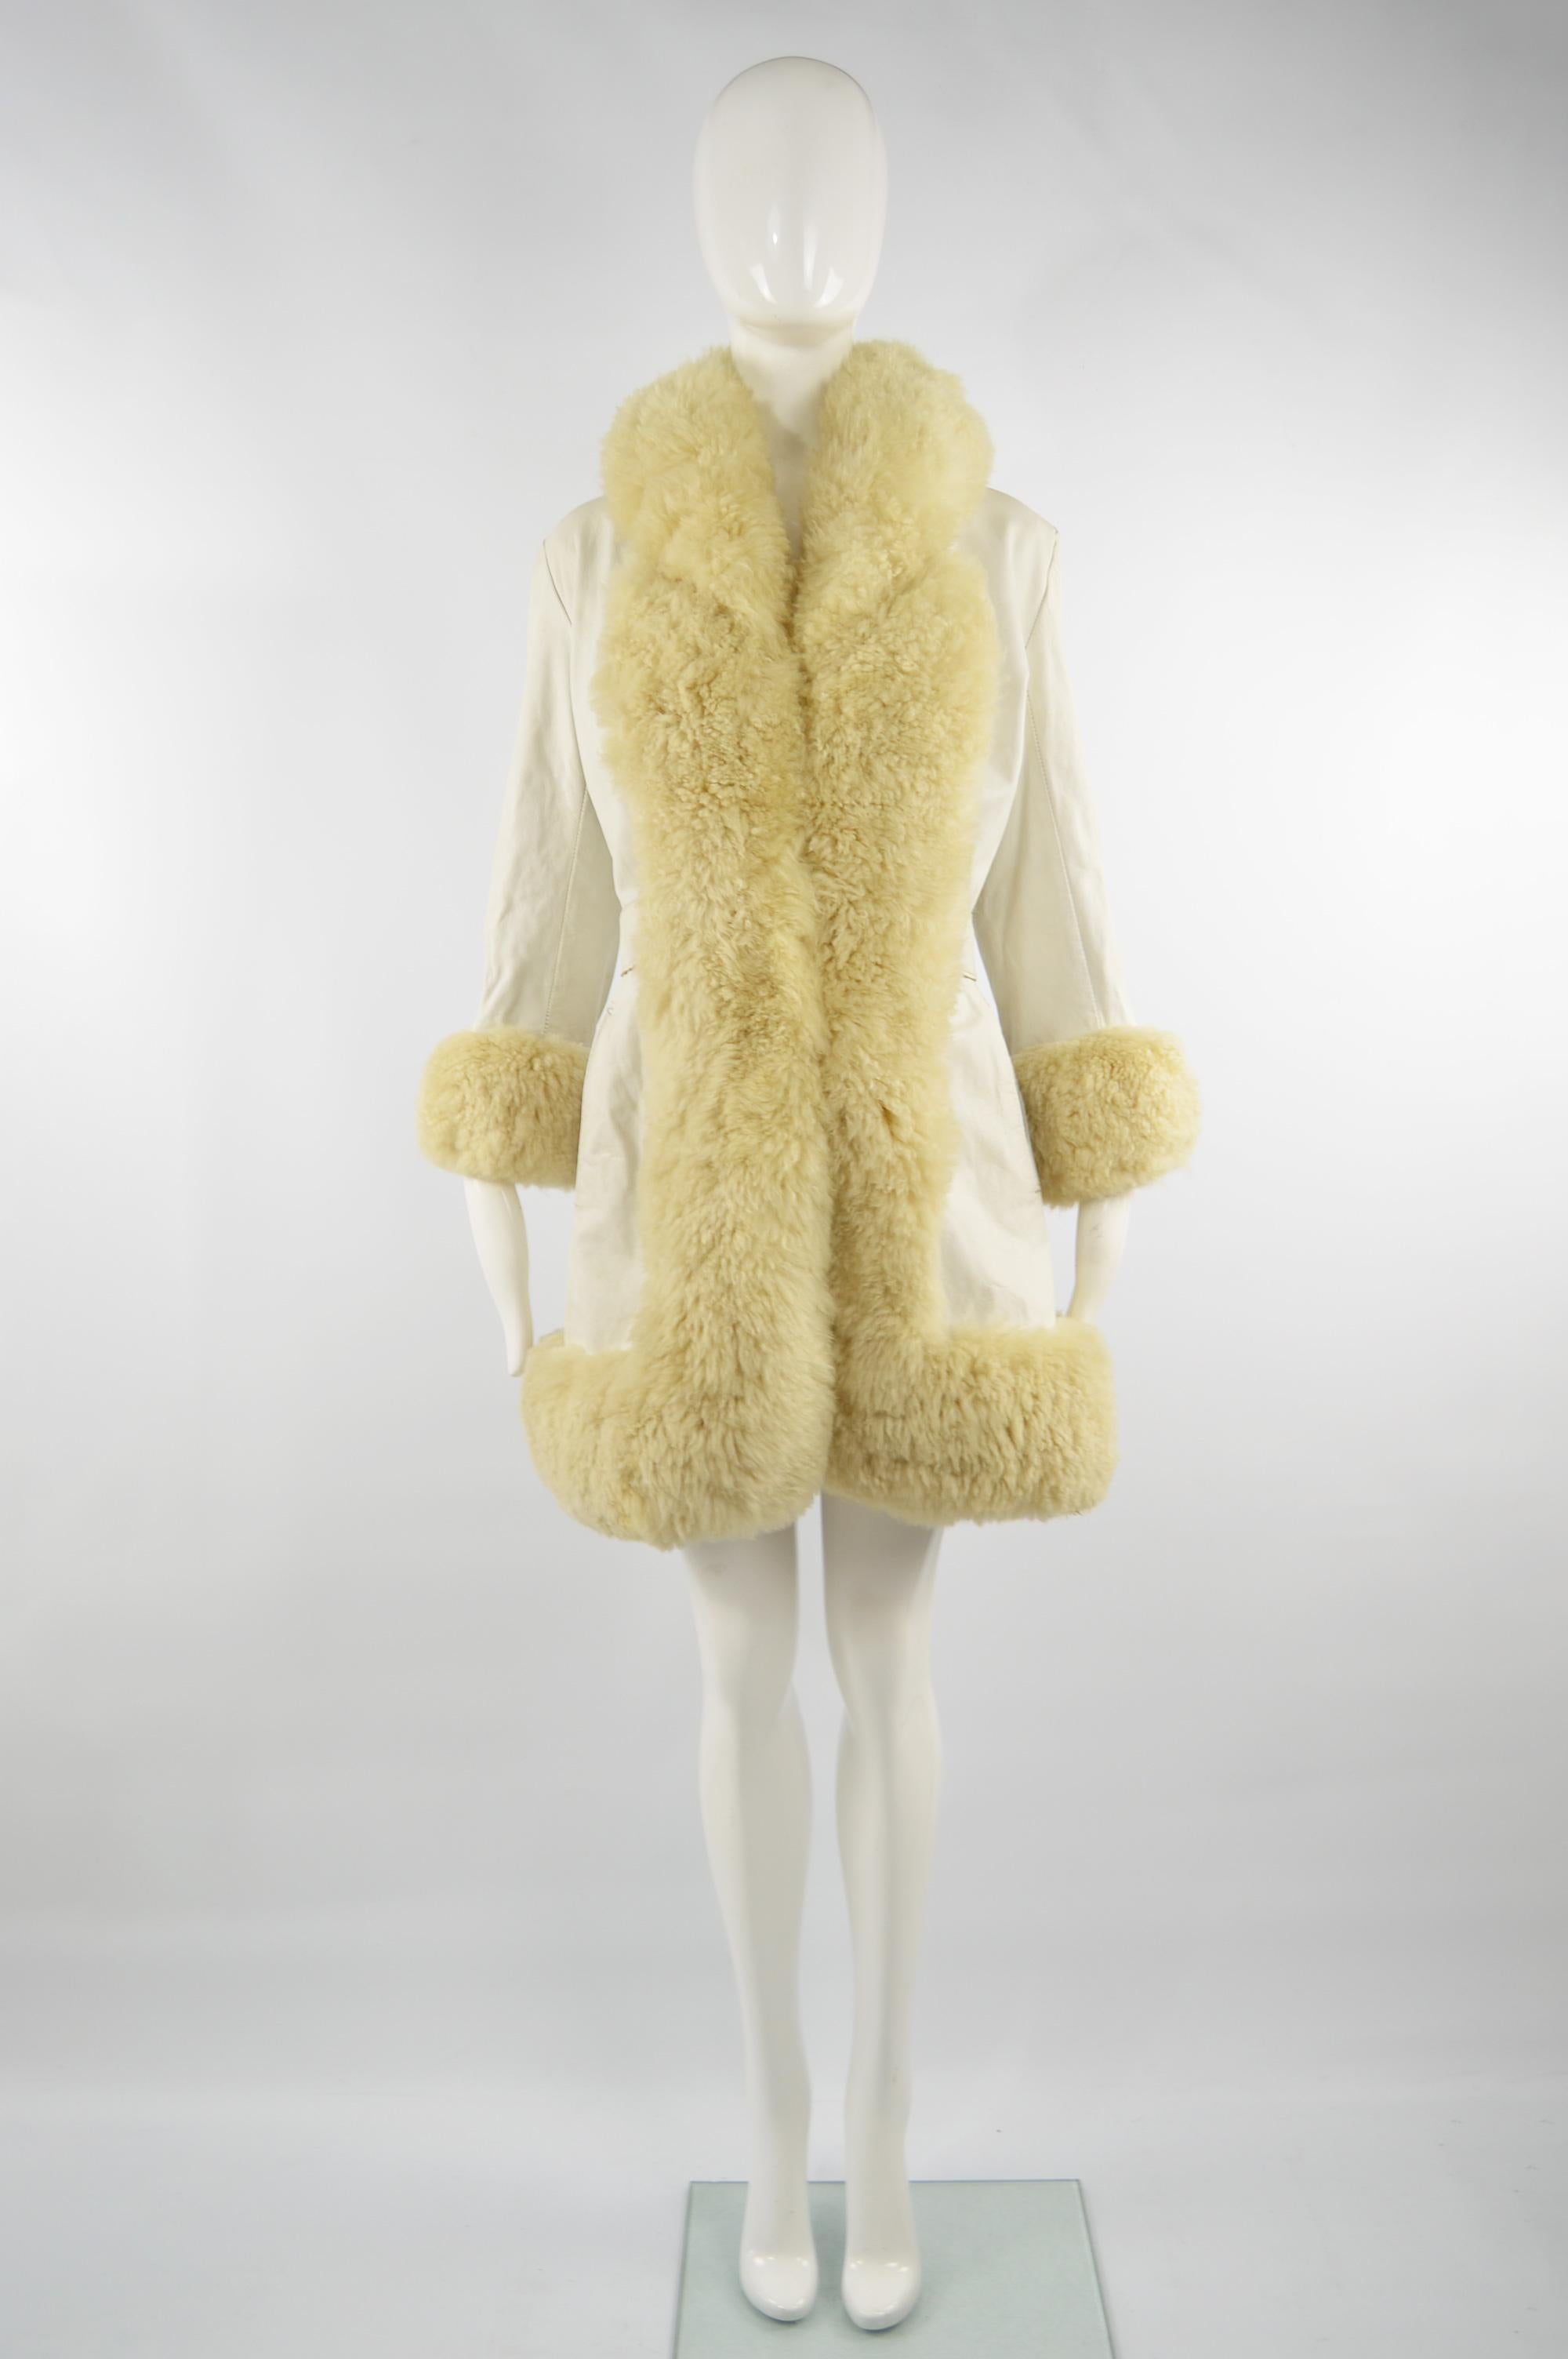 An absolutely amazing vintage bohemian afghan coat from the 60s in a white leather with an ultra glamorous shearling trim. Since the leather itself is lightweight and it is lined in a black satin, it is probably best suited to spring and autumn.